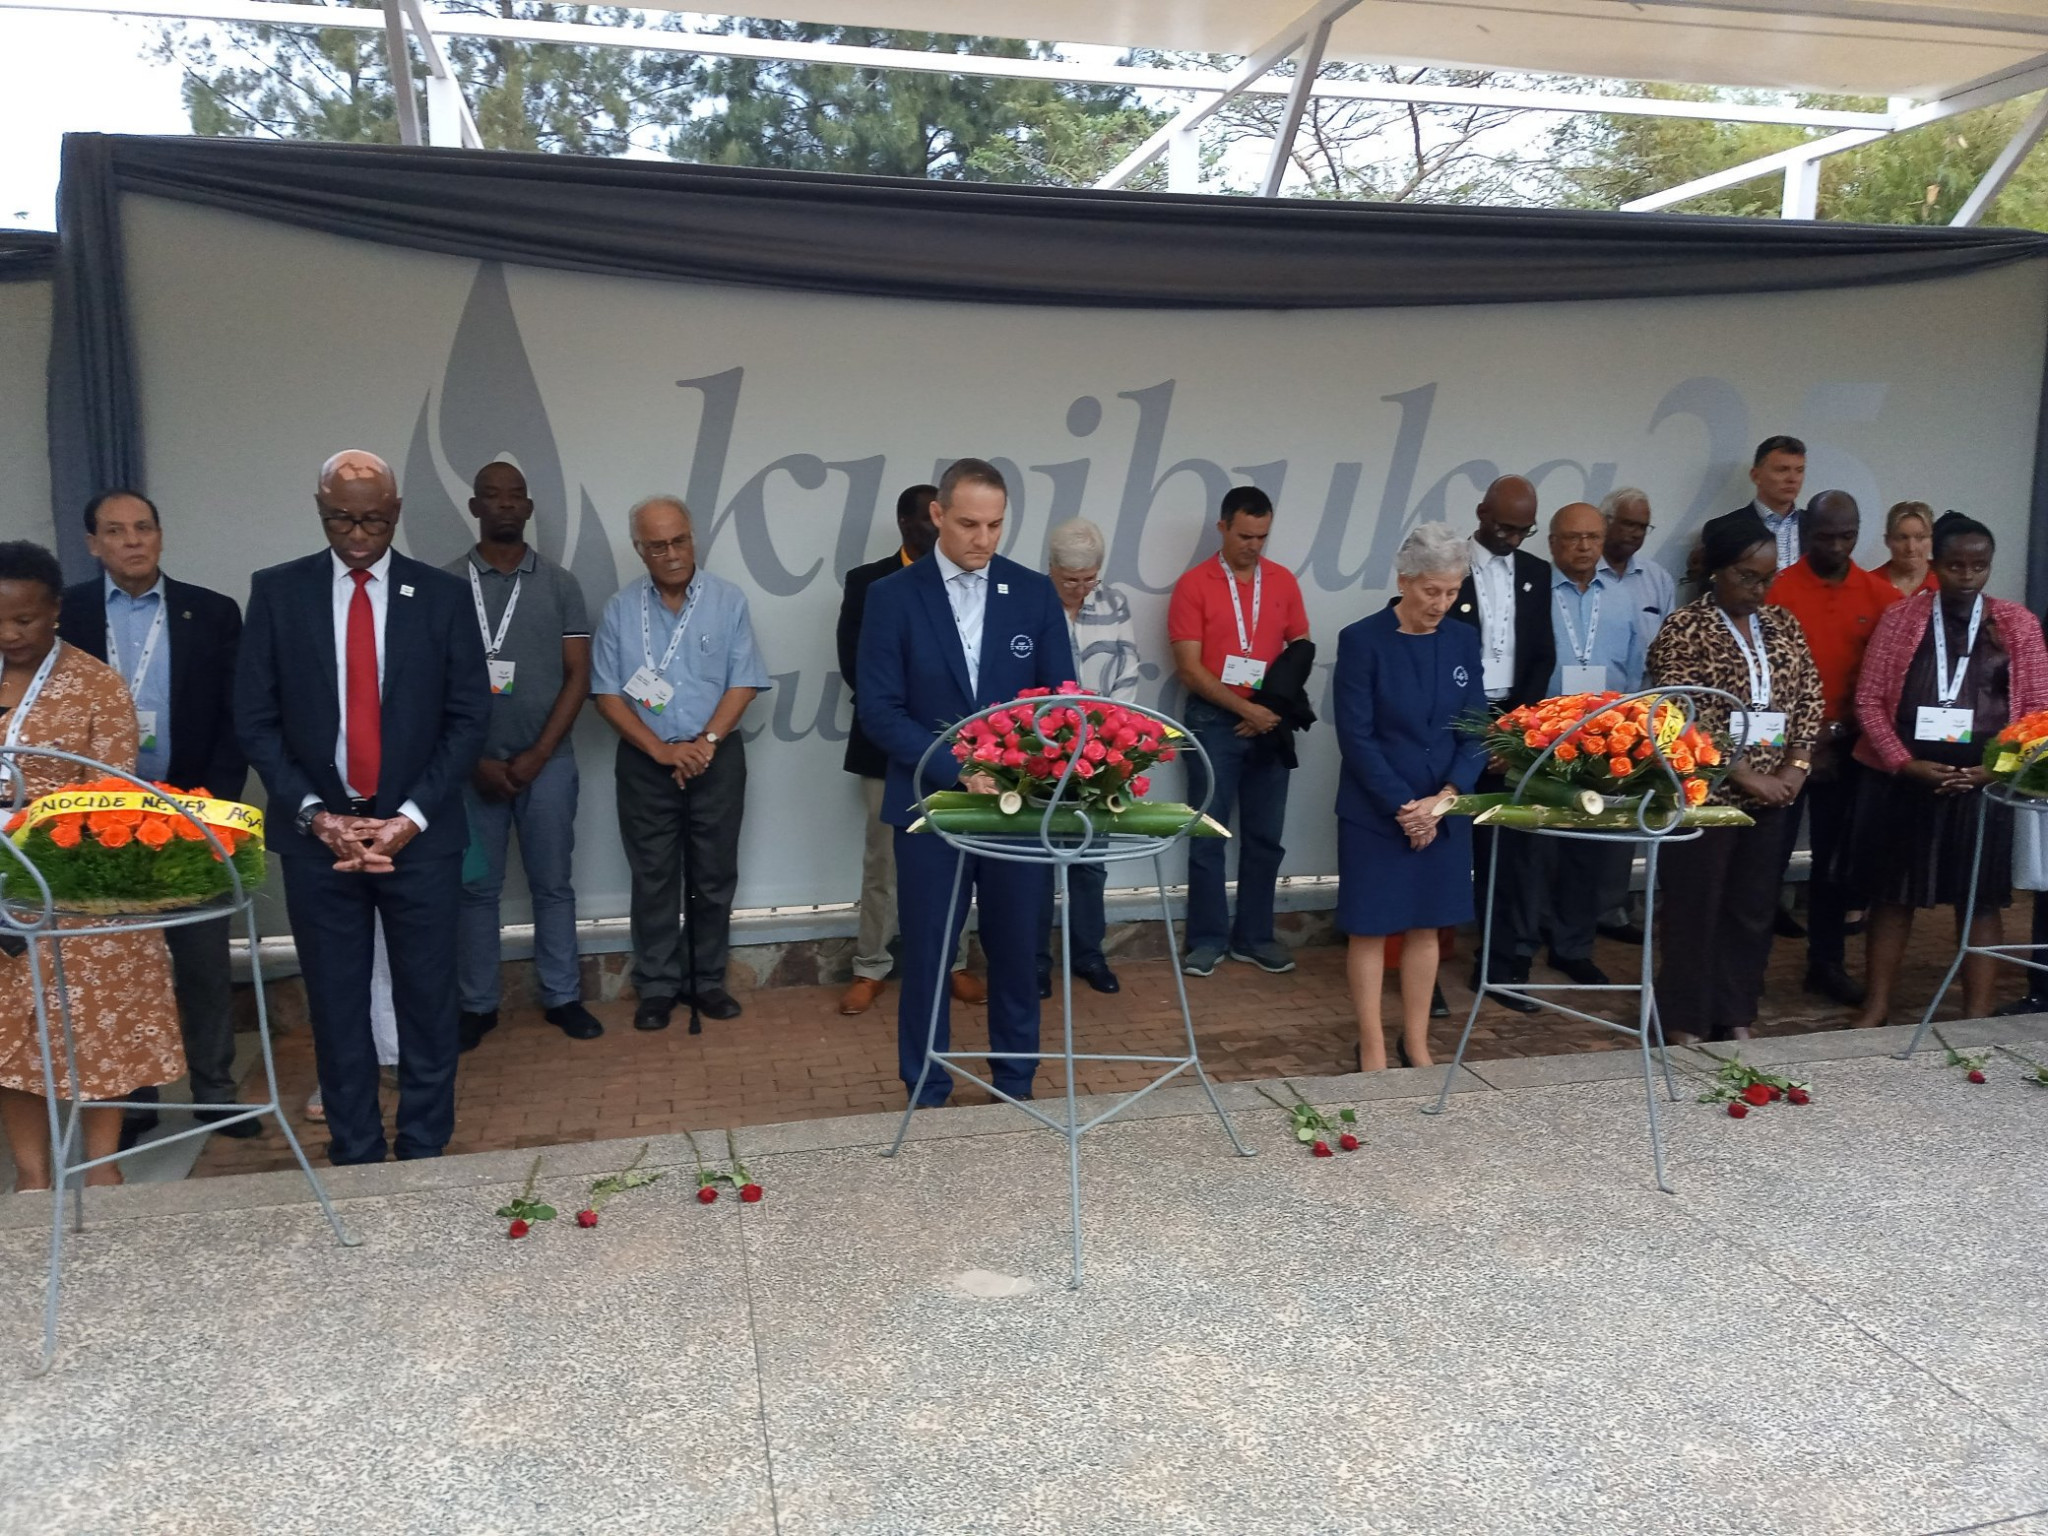 Commonwealth Games Federation General Assembly in Kigali starts with dancing and wreath-laying ceremony